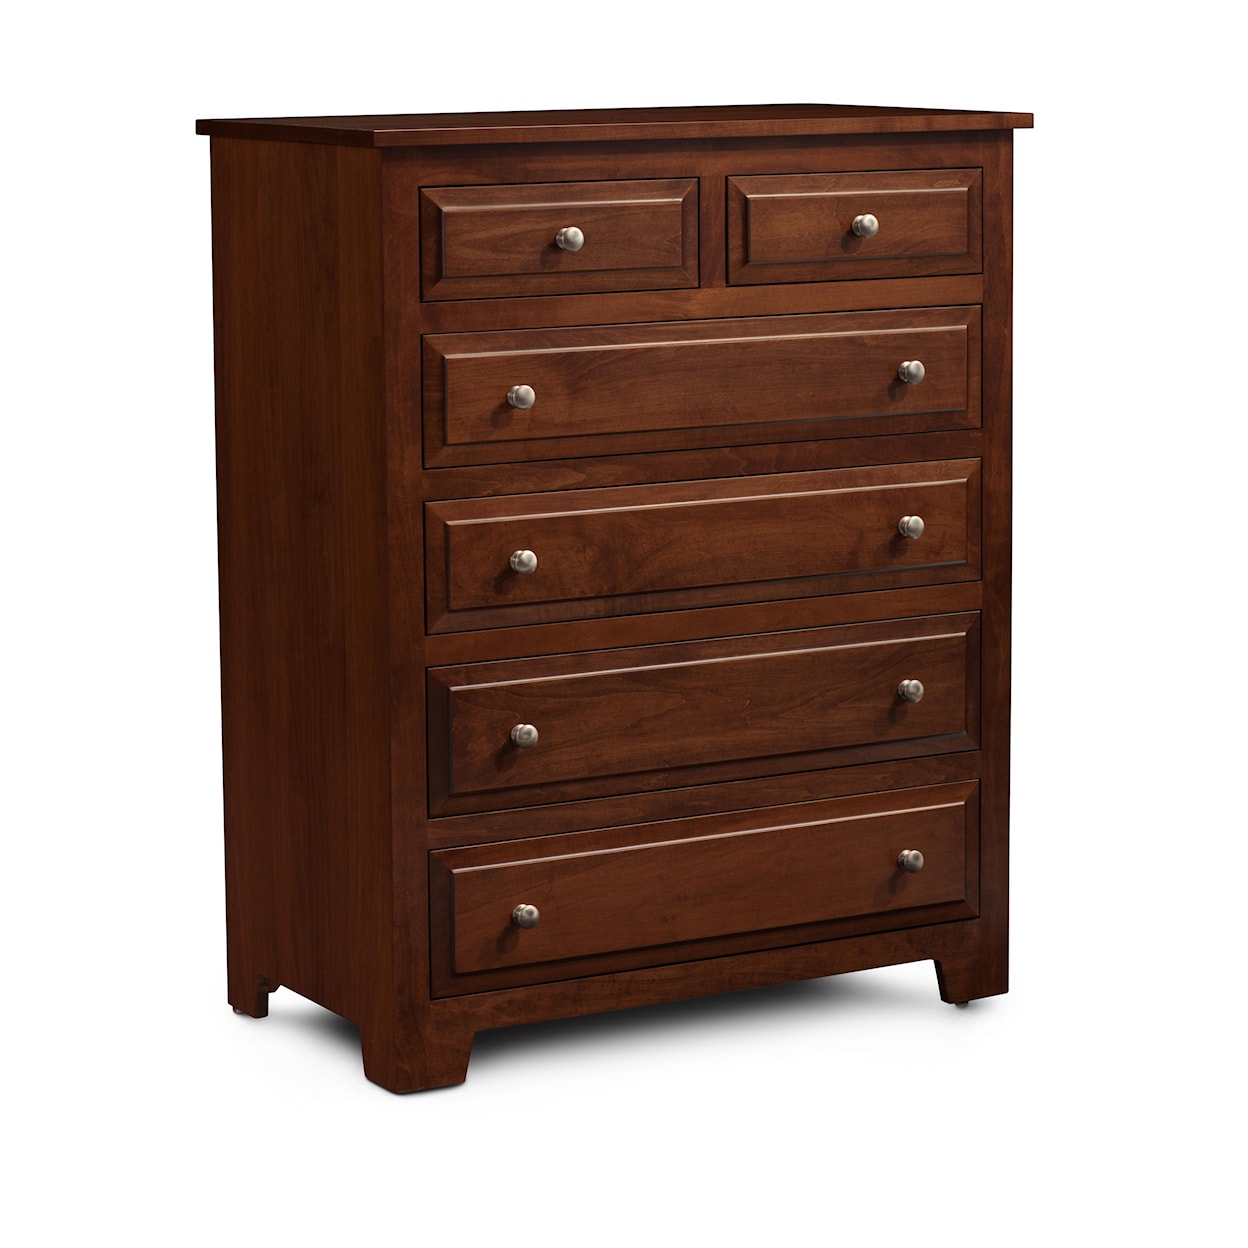 Simply Amish Homestead Amish 6-Drawer Chest